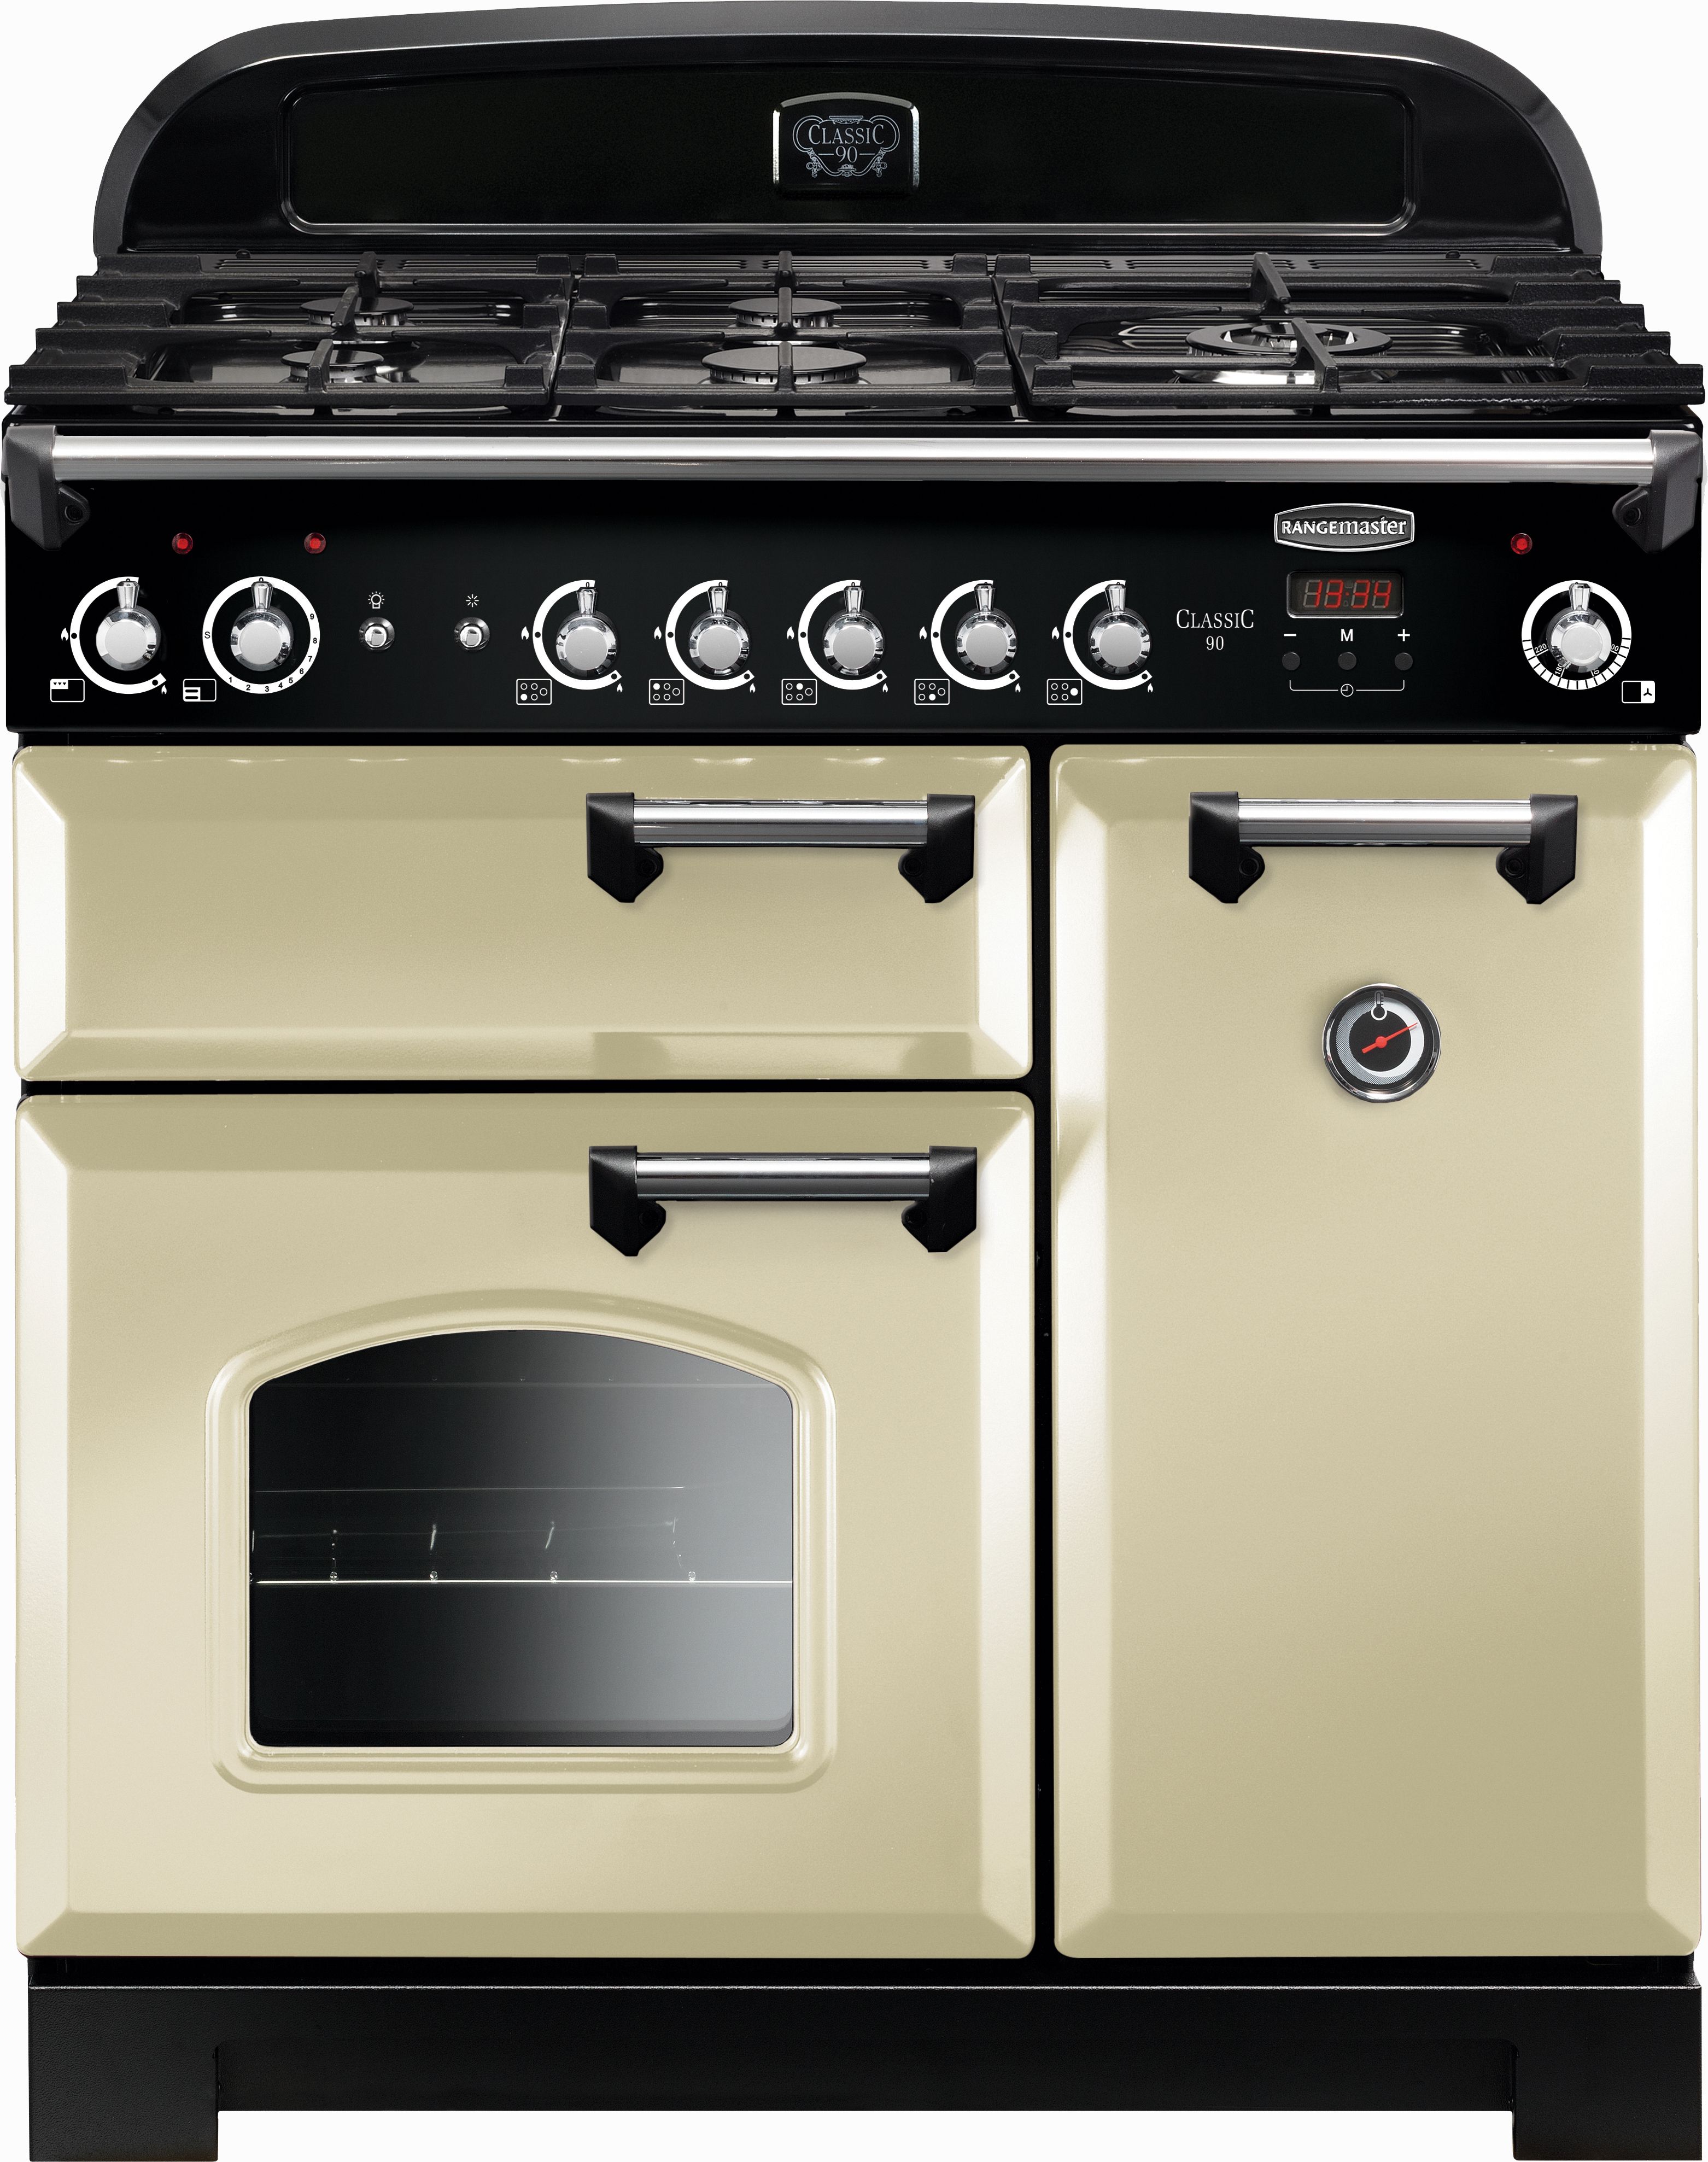 Rangemaster Classic CLA90NGFCR/C 90cm Gas Range Cooker with Electric Fan Oven - Cream / Chrome - A+/A Rated, Cream